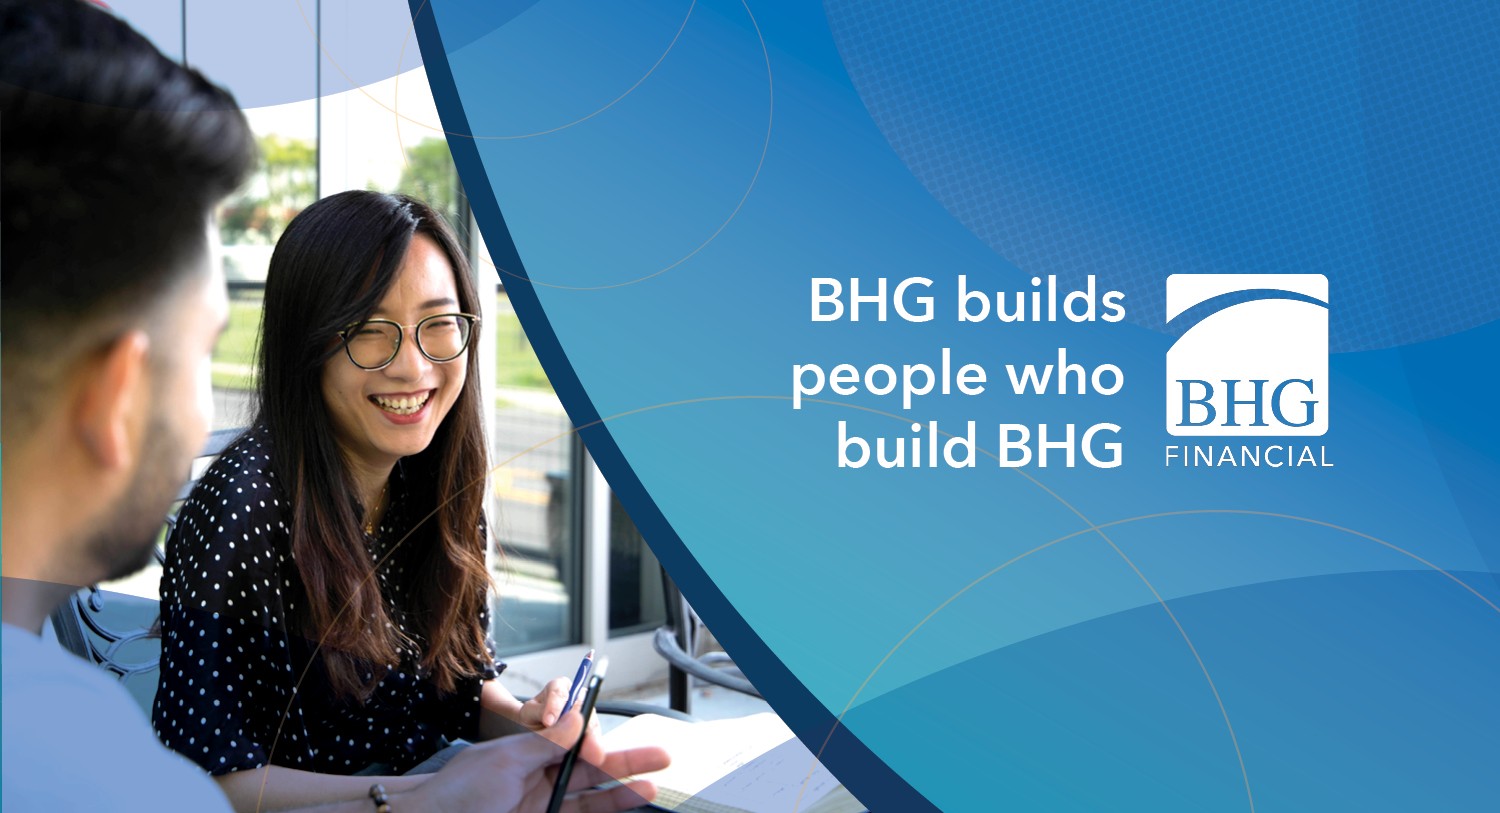 BHG builds people who build BHG.